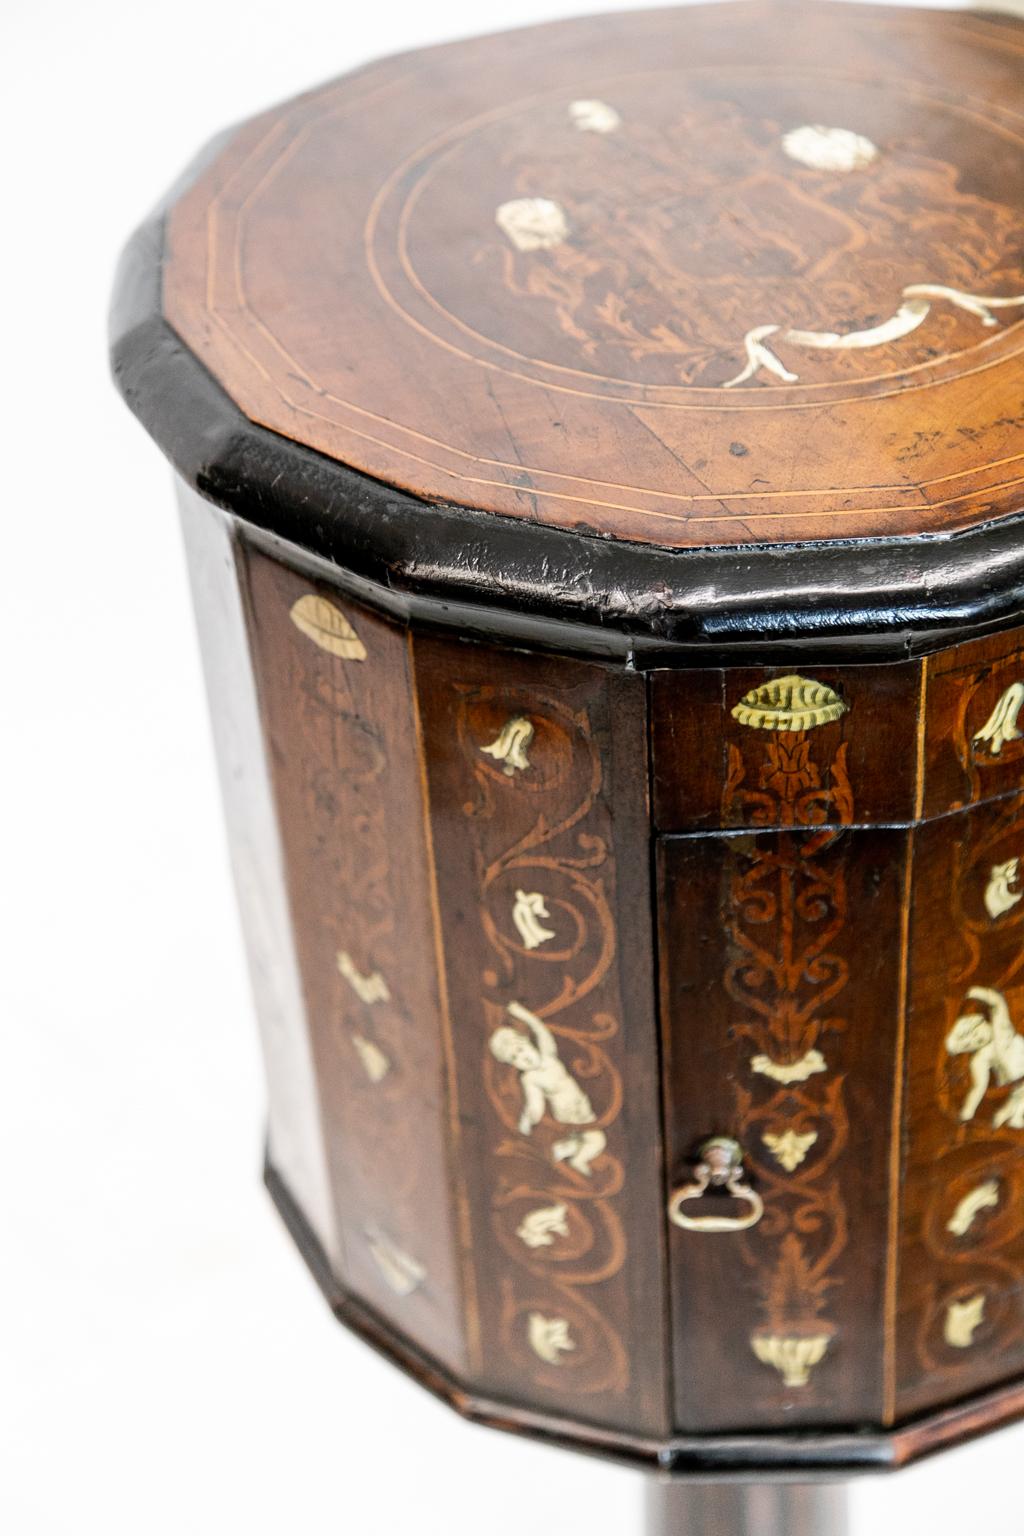 18th century Italian Inlaid Pedestal Commode has one drawer and is made of fruitwood in a hexadecagon shape. The top is inlaid with boxwood double line string inlay. The border has double string inlay surrounding a center medallion which has a crest